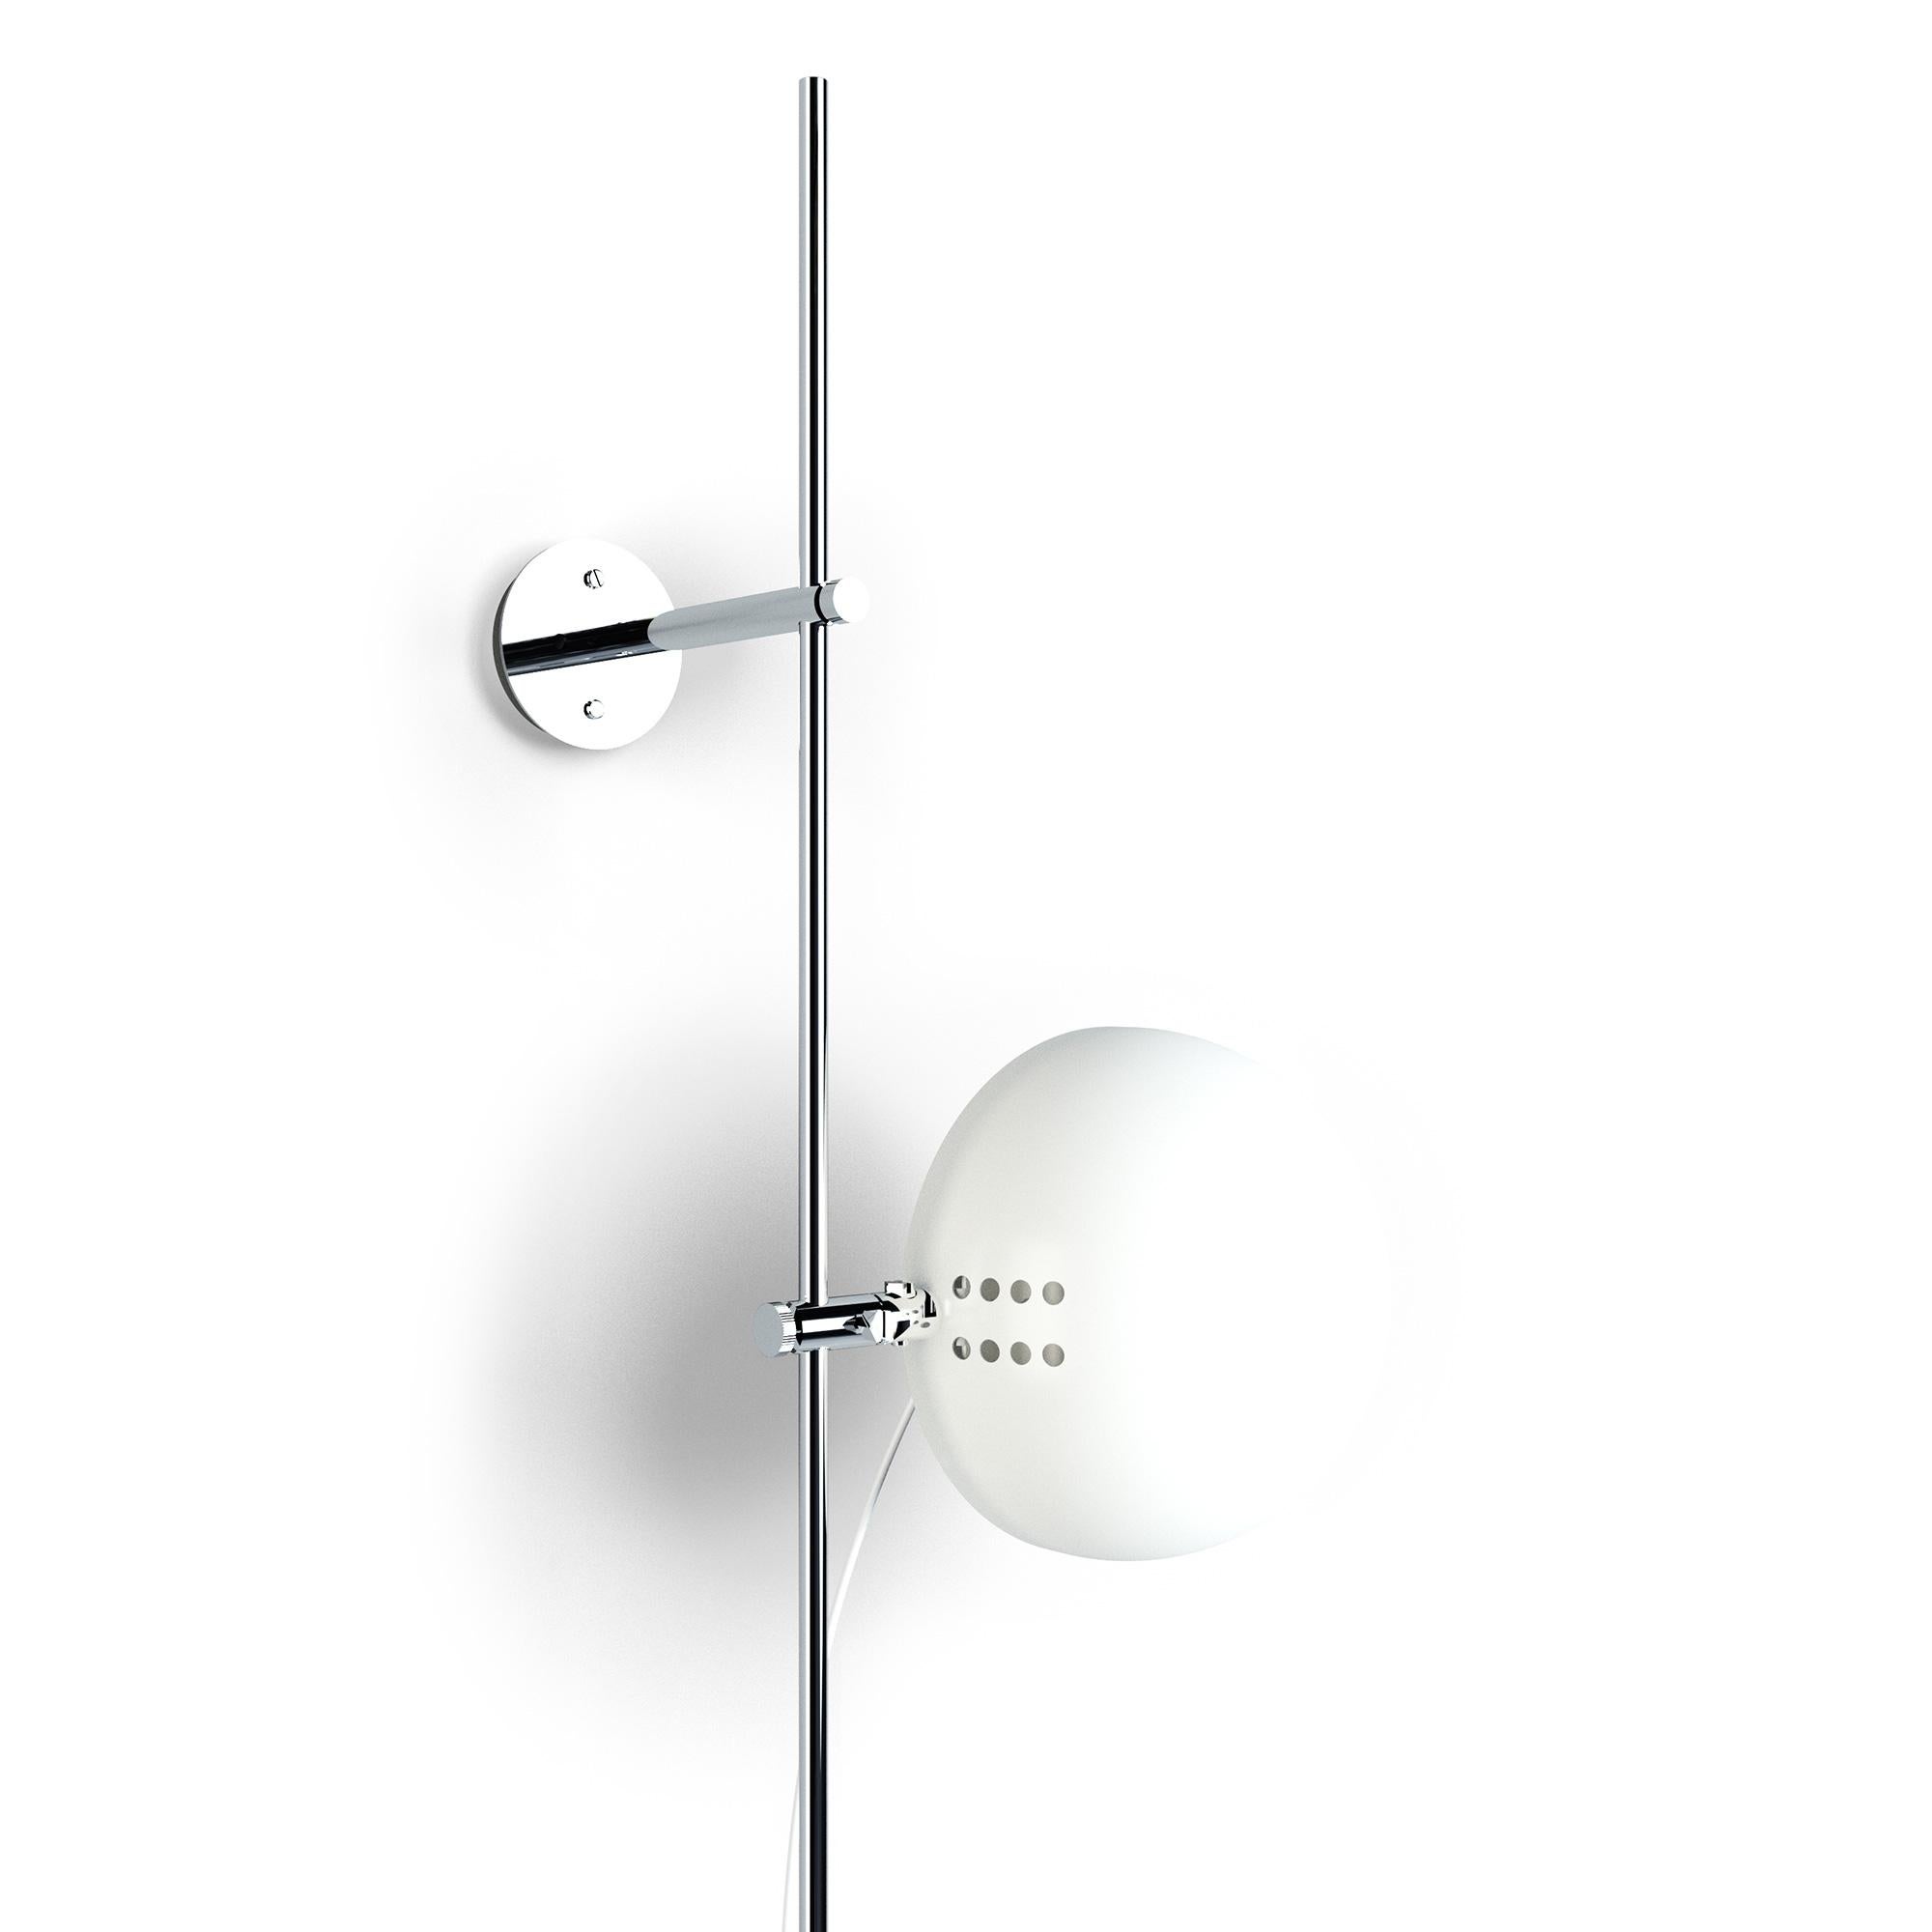 A24-1500 Wall Lamp by Disderot
Limited Edition. 
Designed by Alain Richard
Dimensions: Ø 30 x H 150 cm.
Materials: Lacquered metal.

Delivered with authentication certificate. Made in France. Available in different colored metal options. Custom